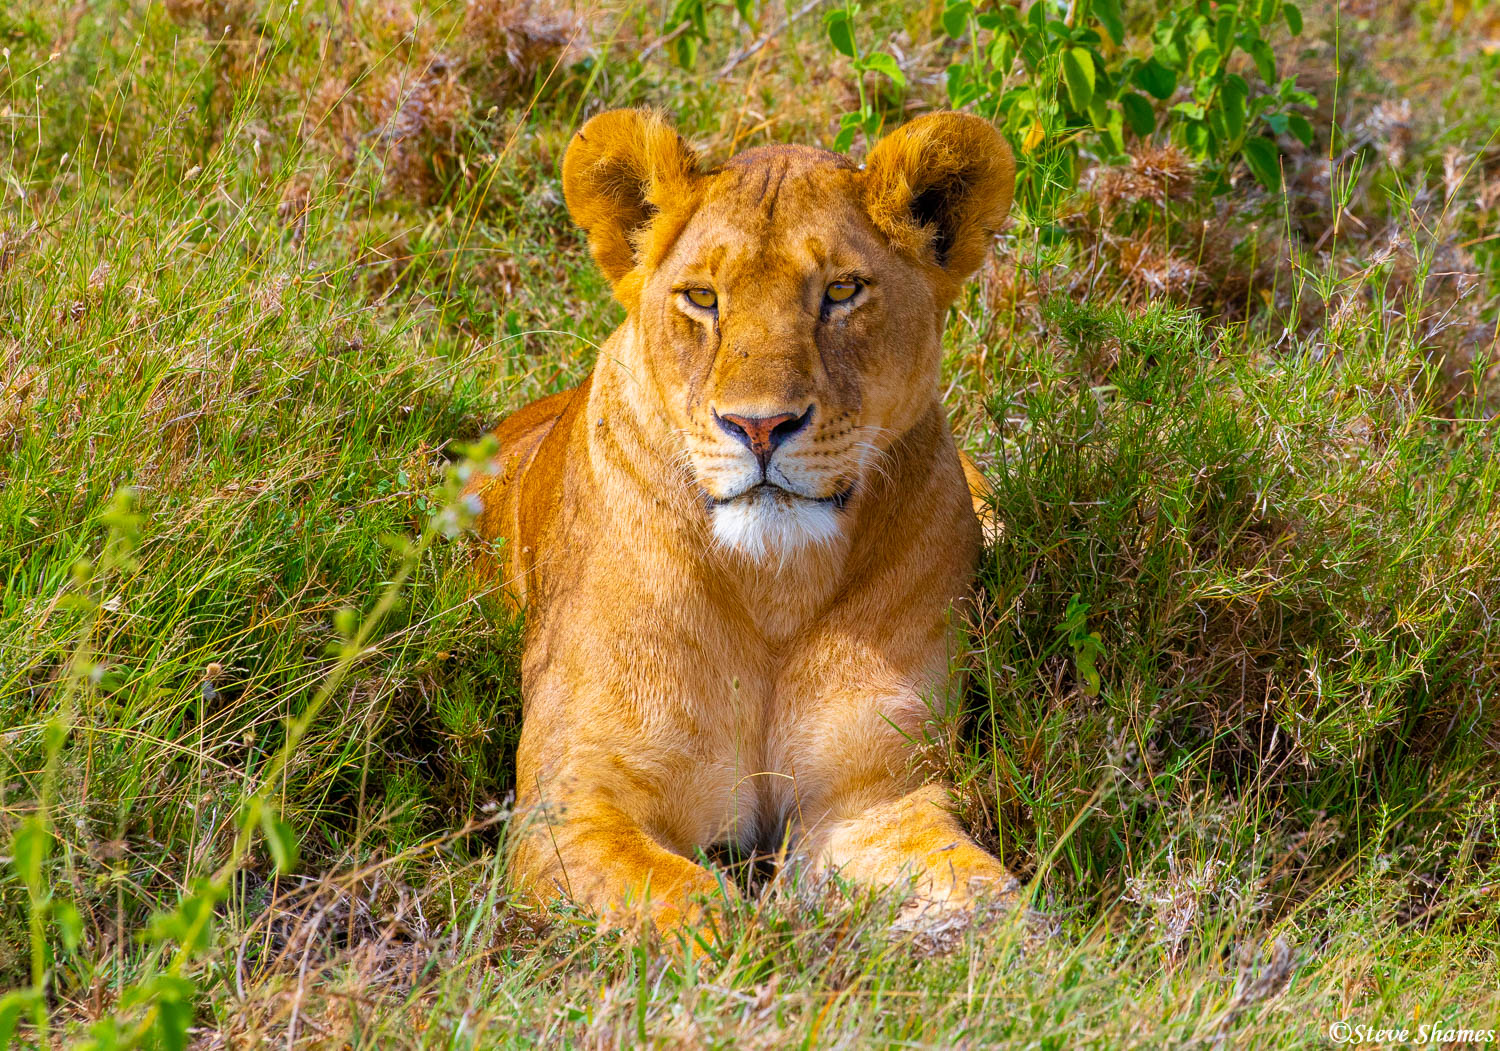 I like this portrait of a very happy and content looking lioness.